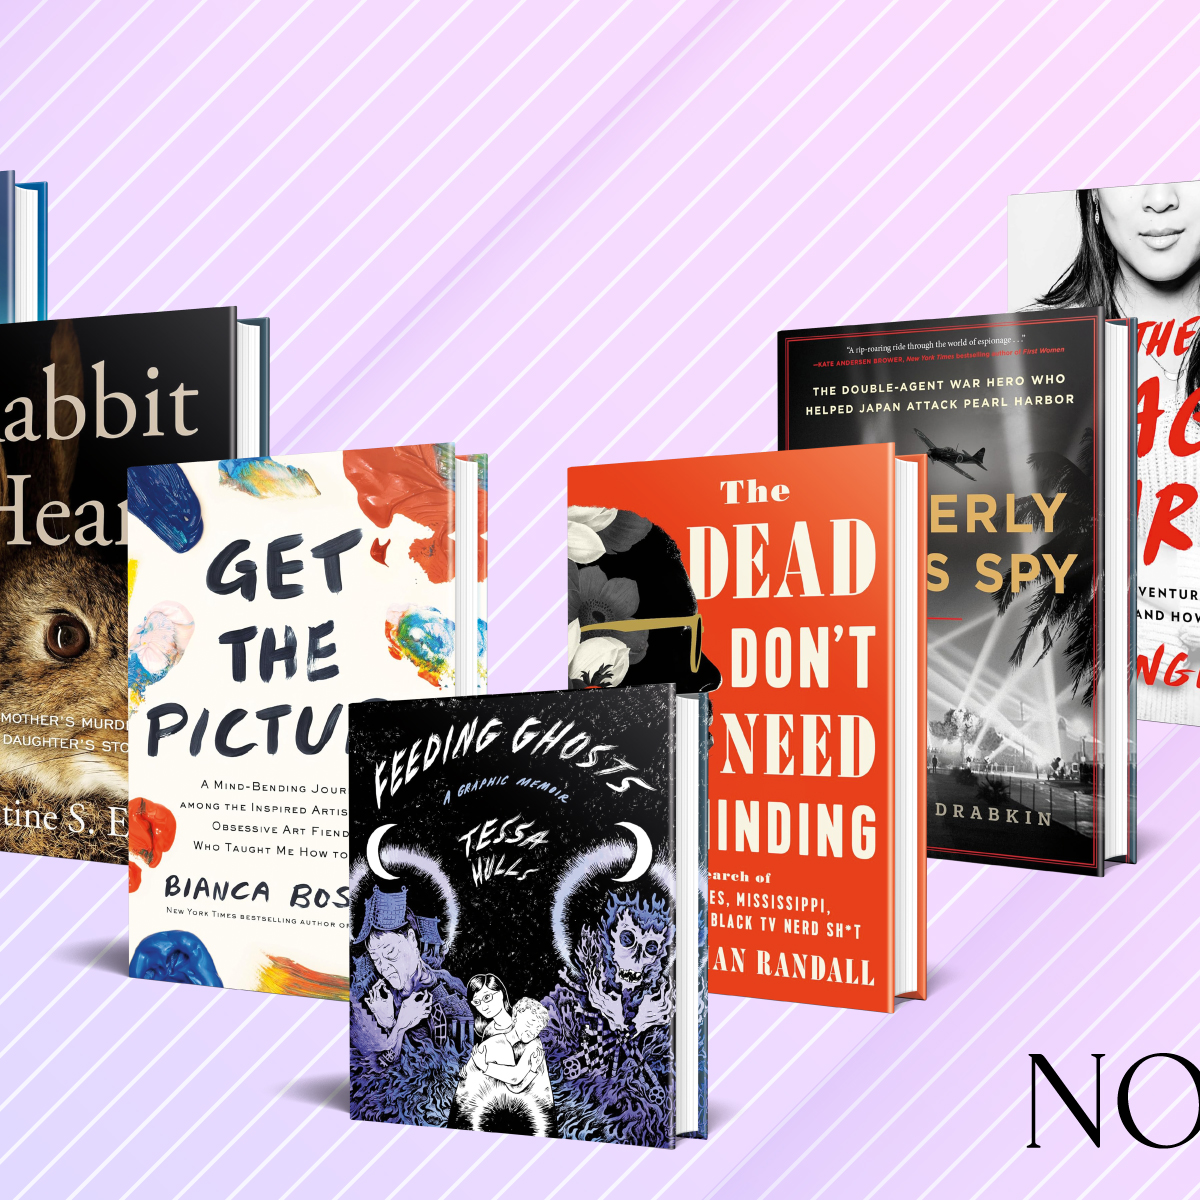 These 20 new releases are sure to keep your attention until the very last page. ow.ly/R1nJ50RAV2v Follow @KirkusReviews for more book recommendations!